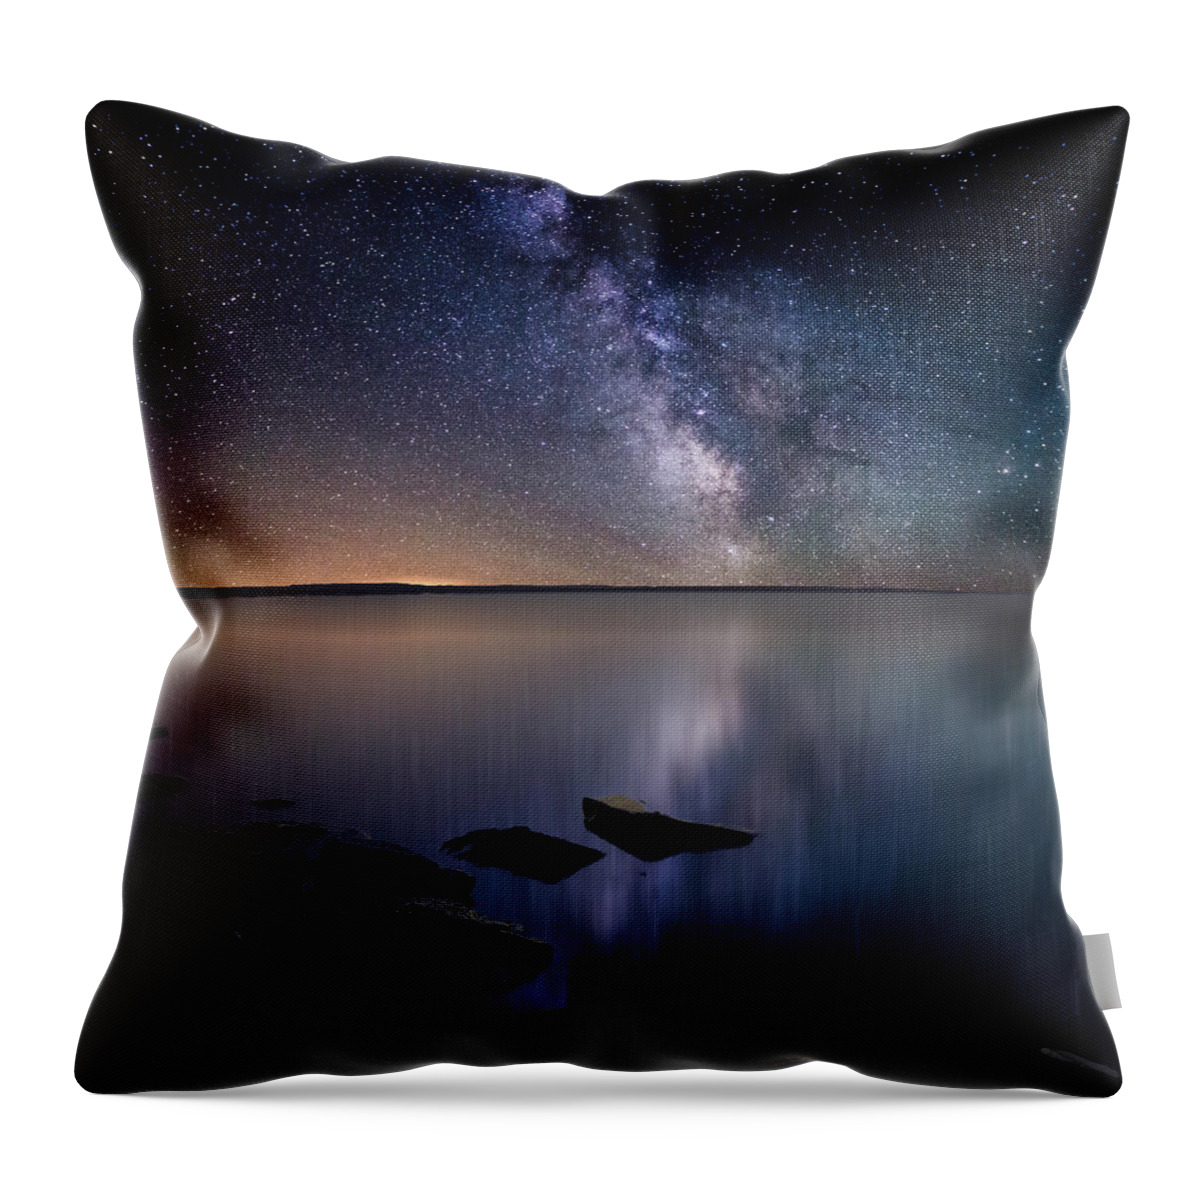 Stars Throw Pillow featuring the photograph Lake Oahe by Aaron J Groen